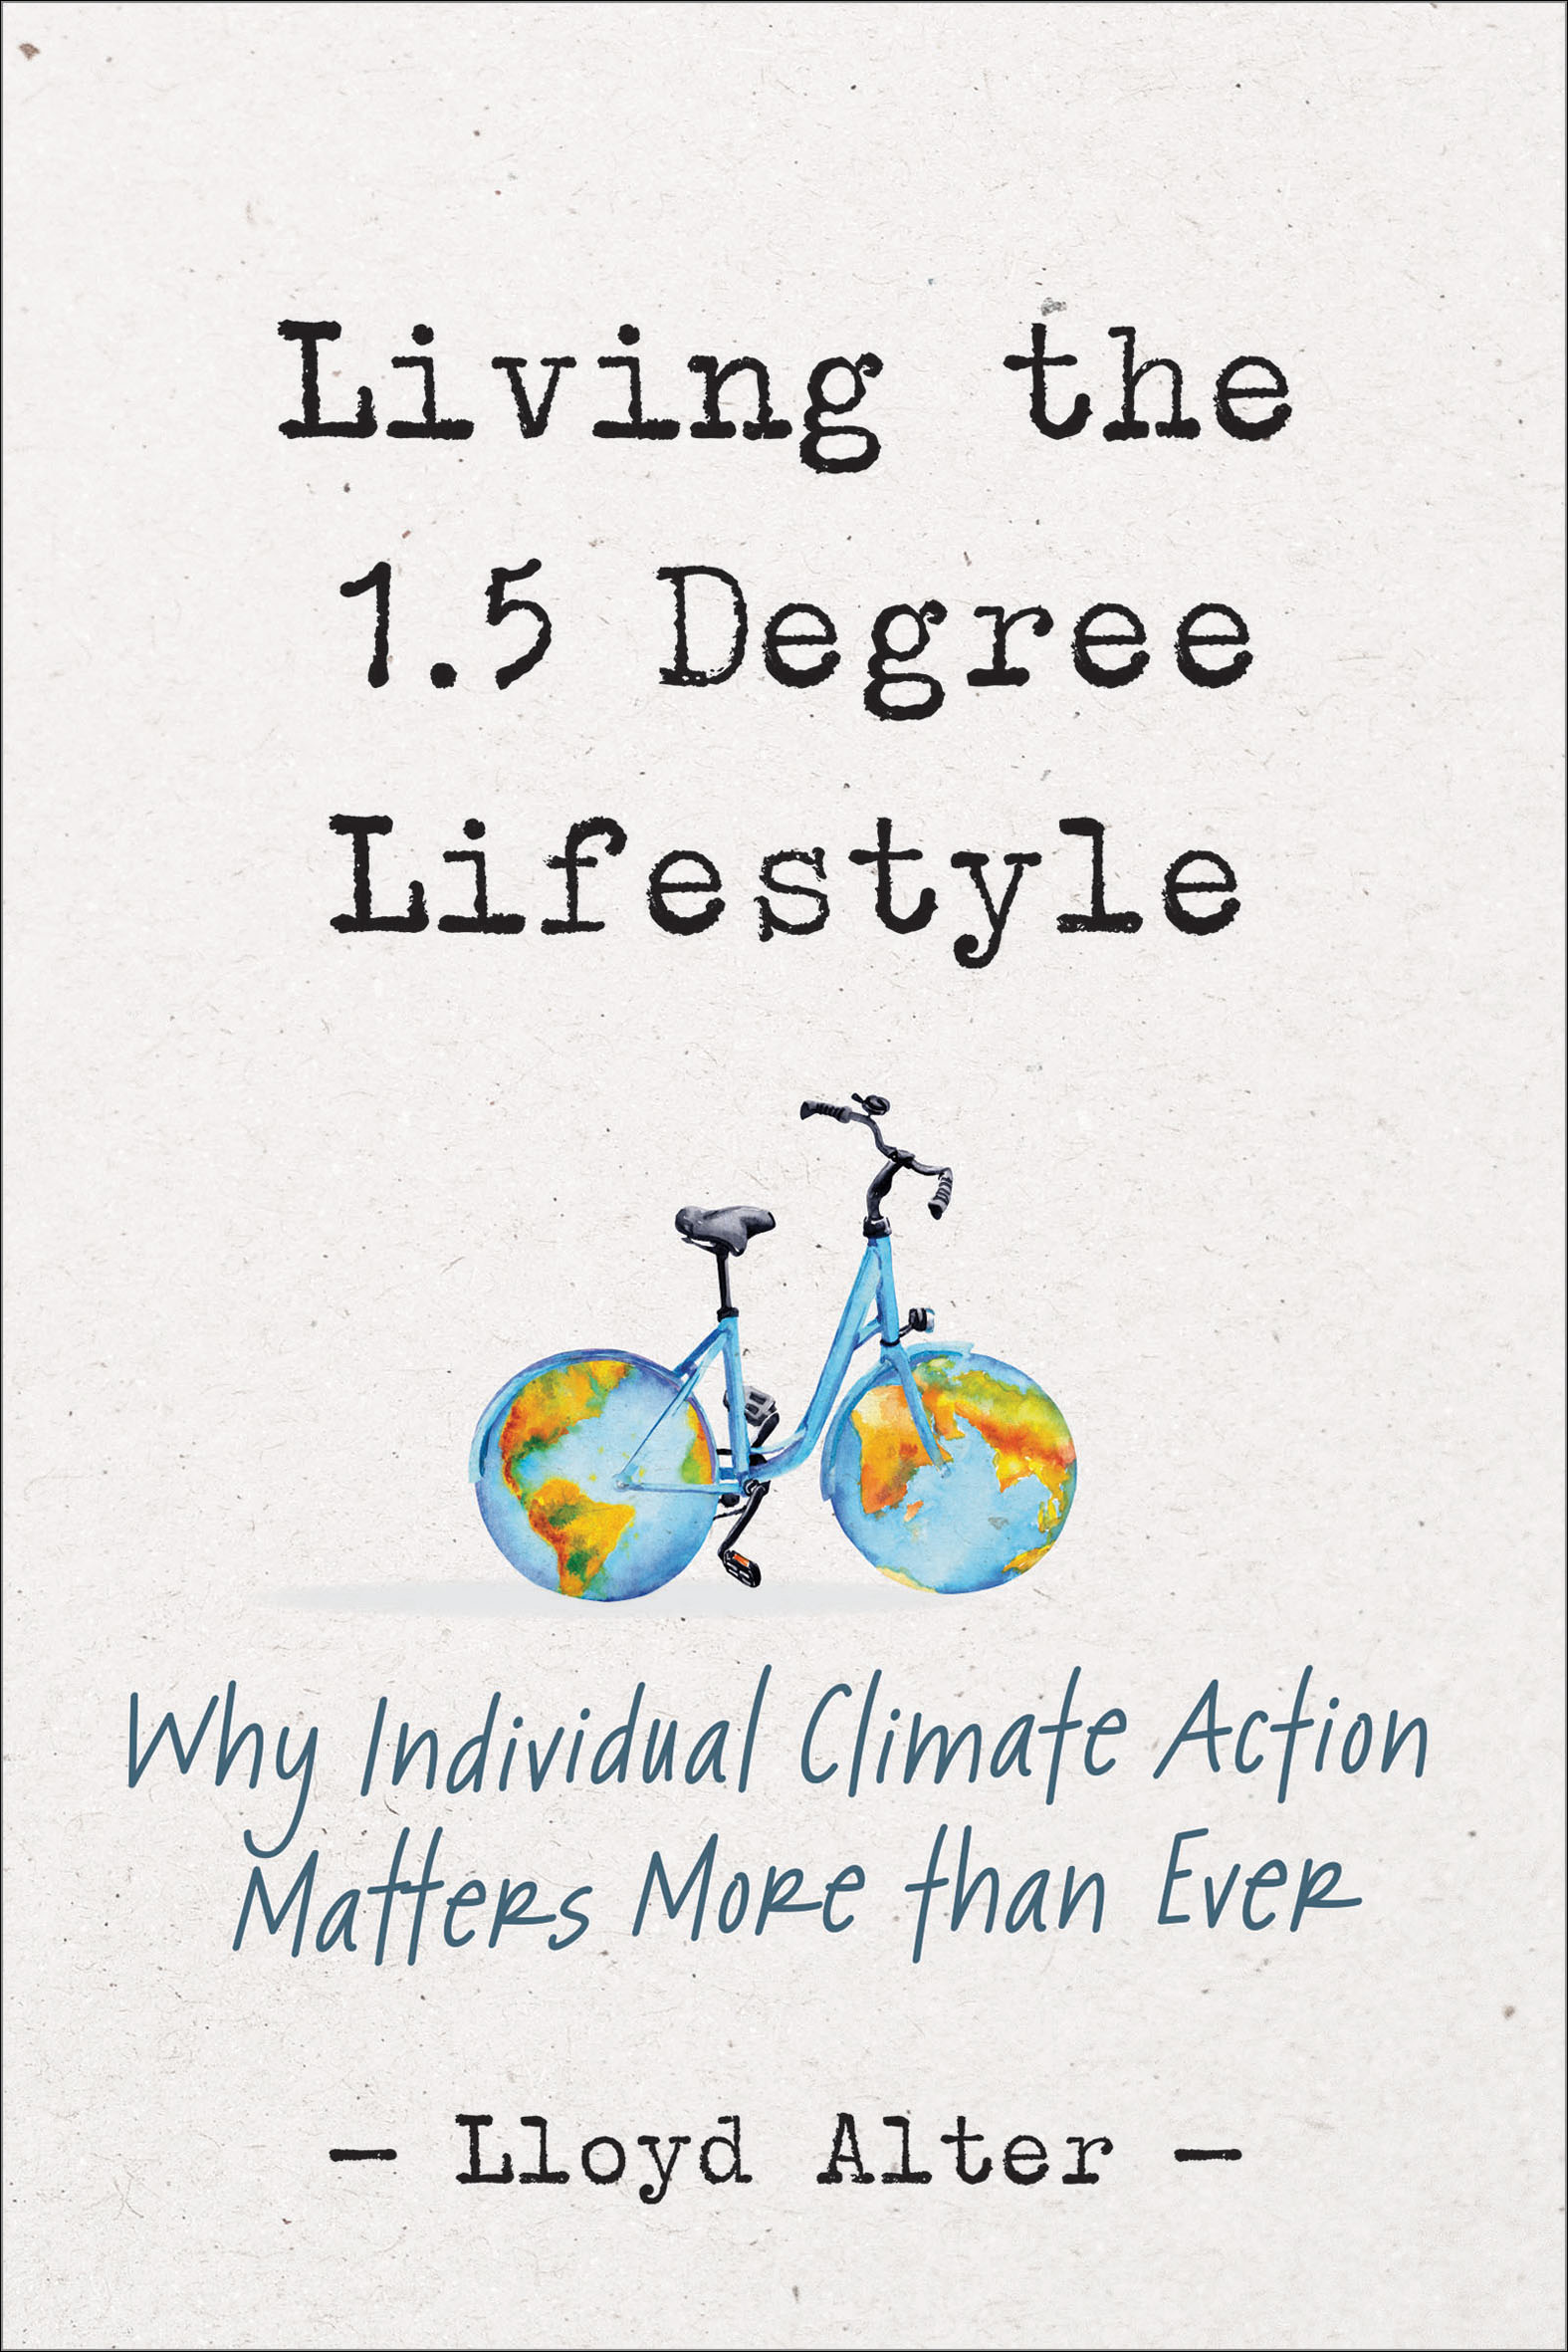 Living The 1.5 Degree Lifestyle: Why Individual Climate Change Matters More Than Ever by Lloyd Alter